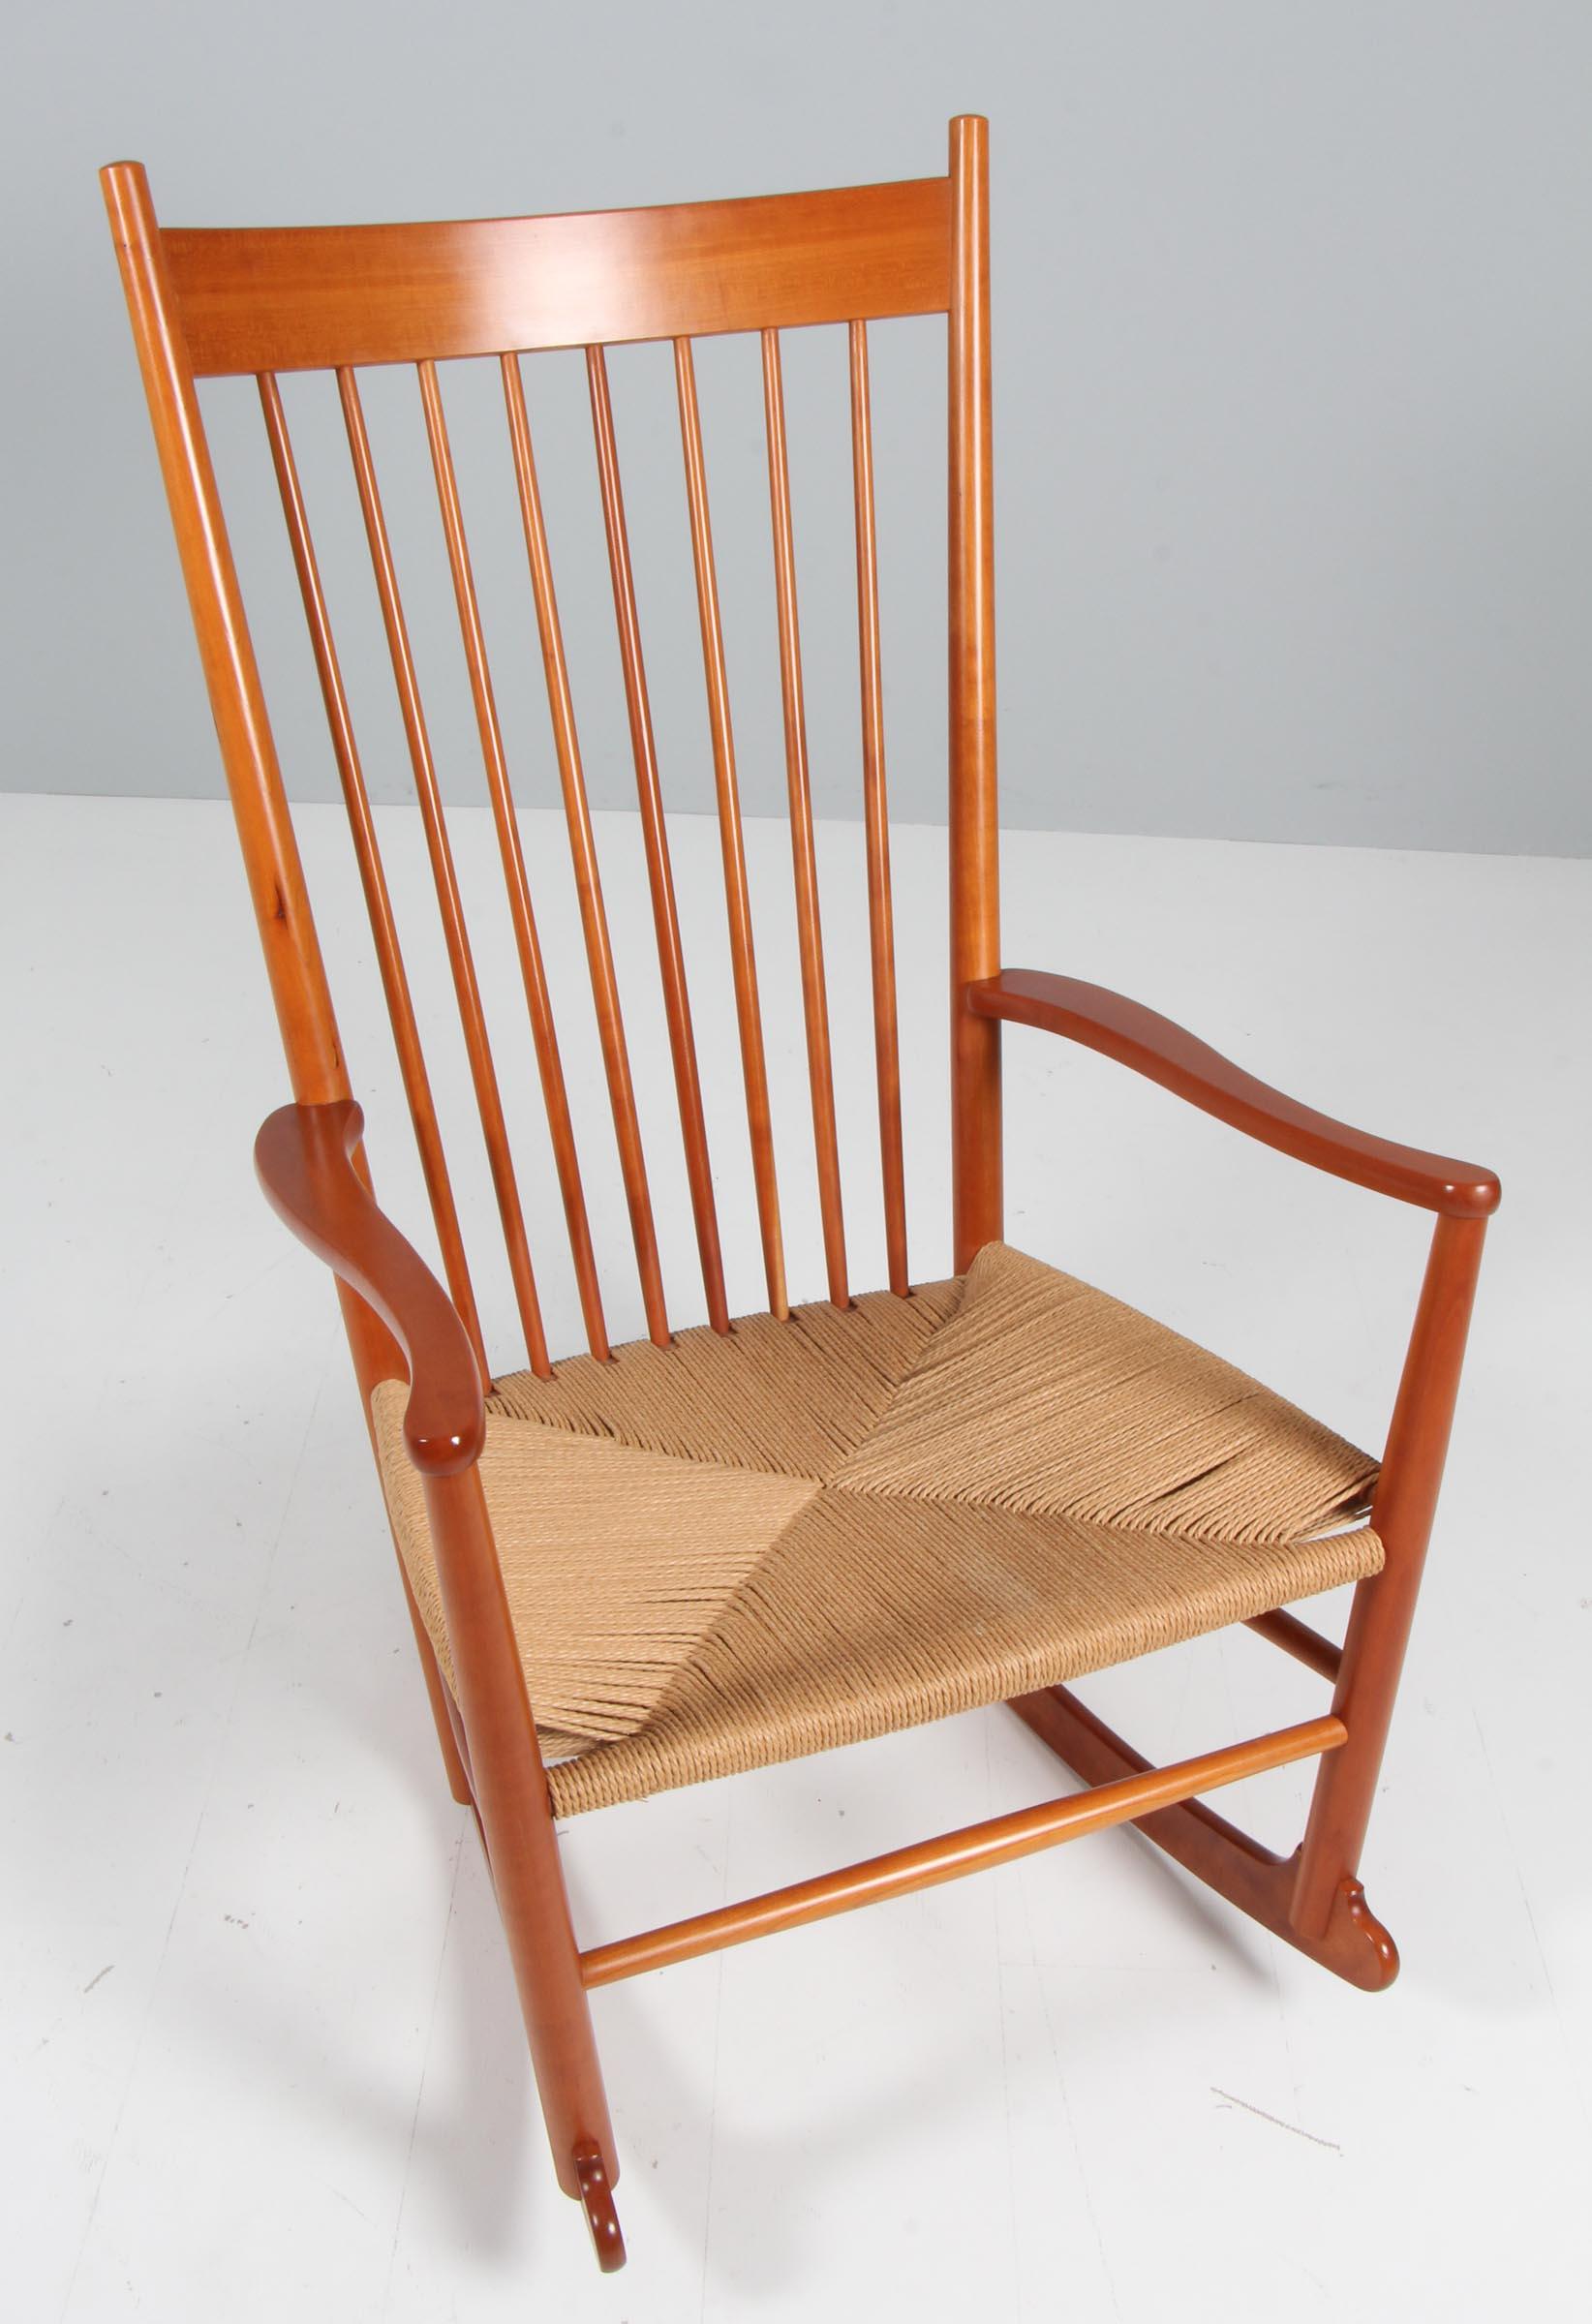 Hans J. Wegner rocking chair with frame of cherry.

Seat made of papercord.

Model J16    